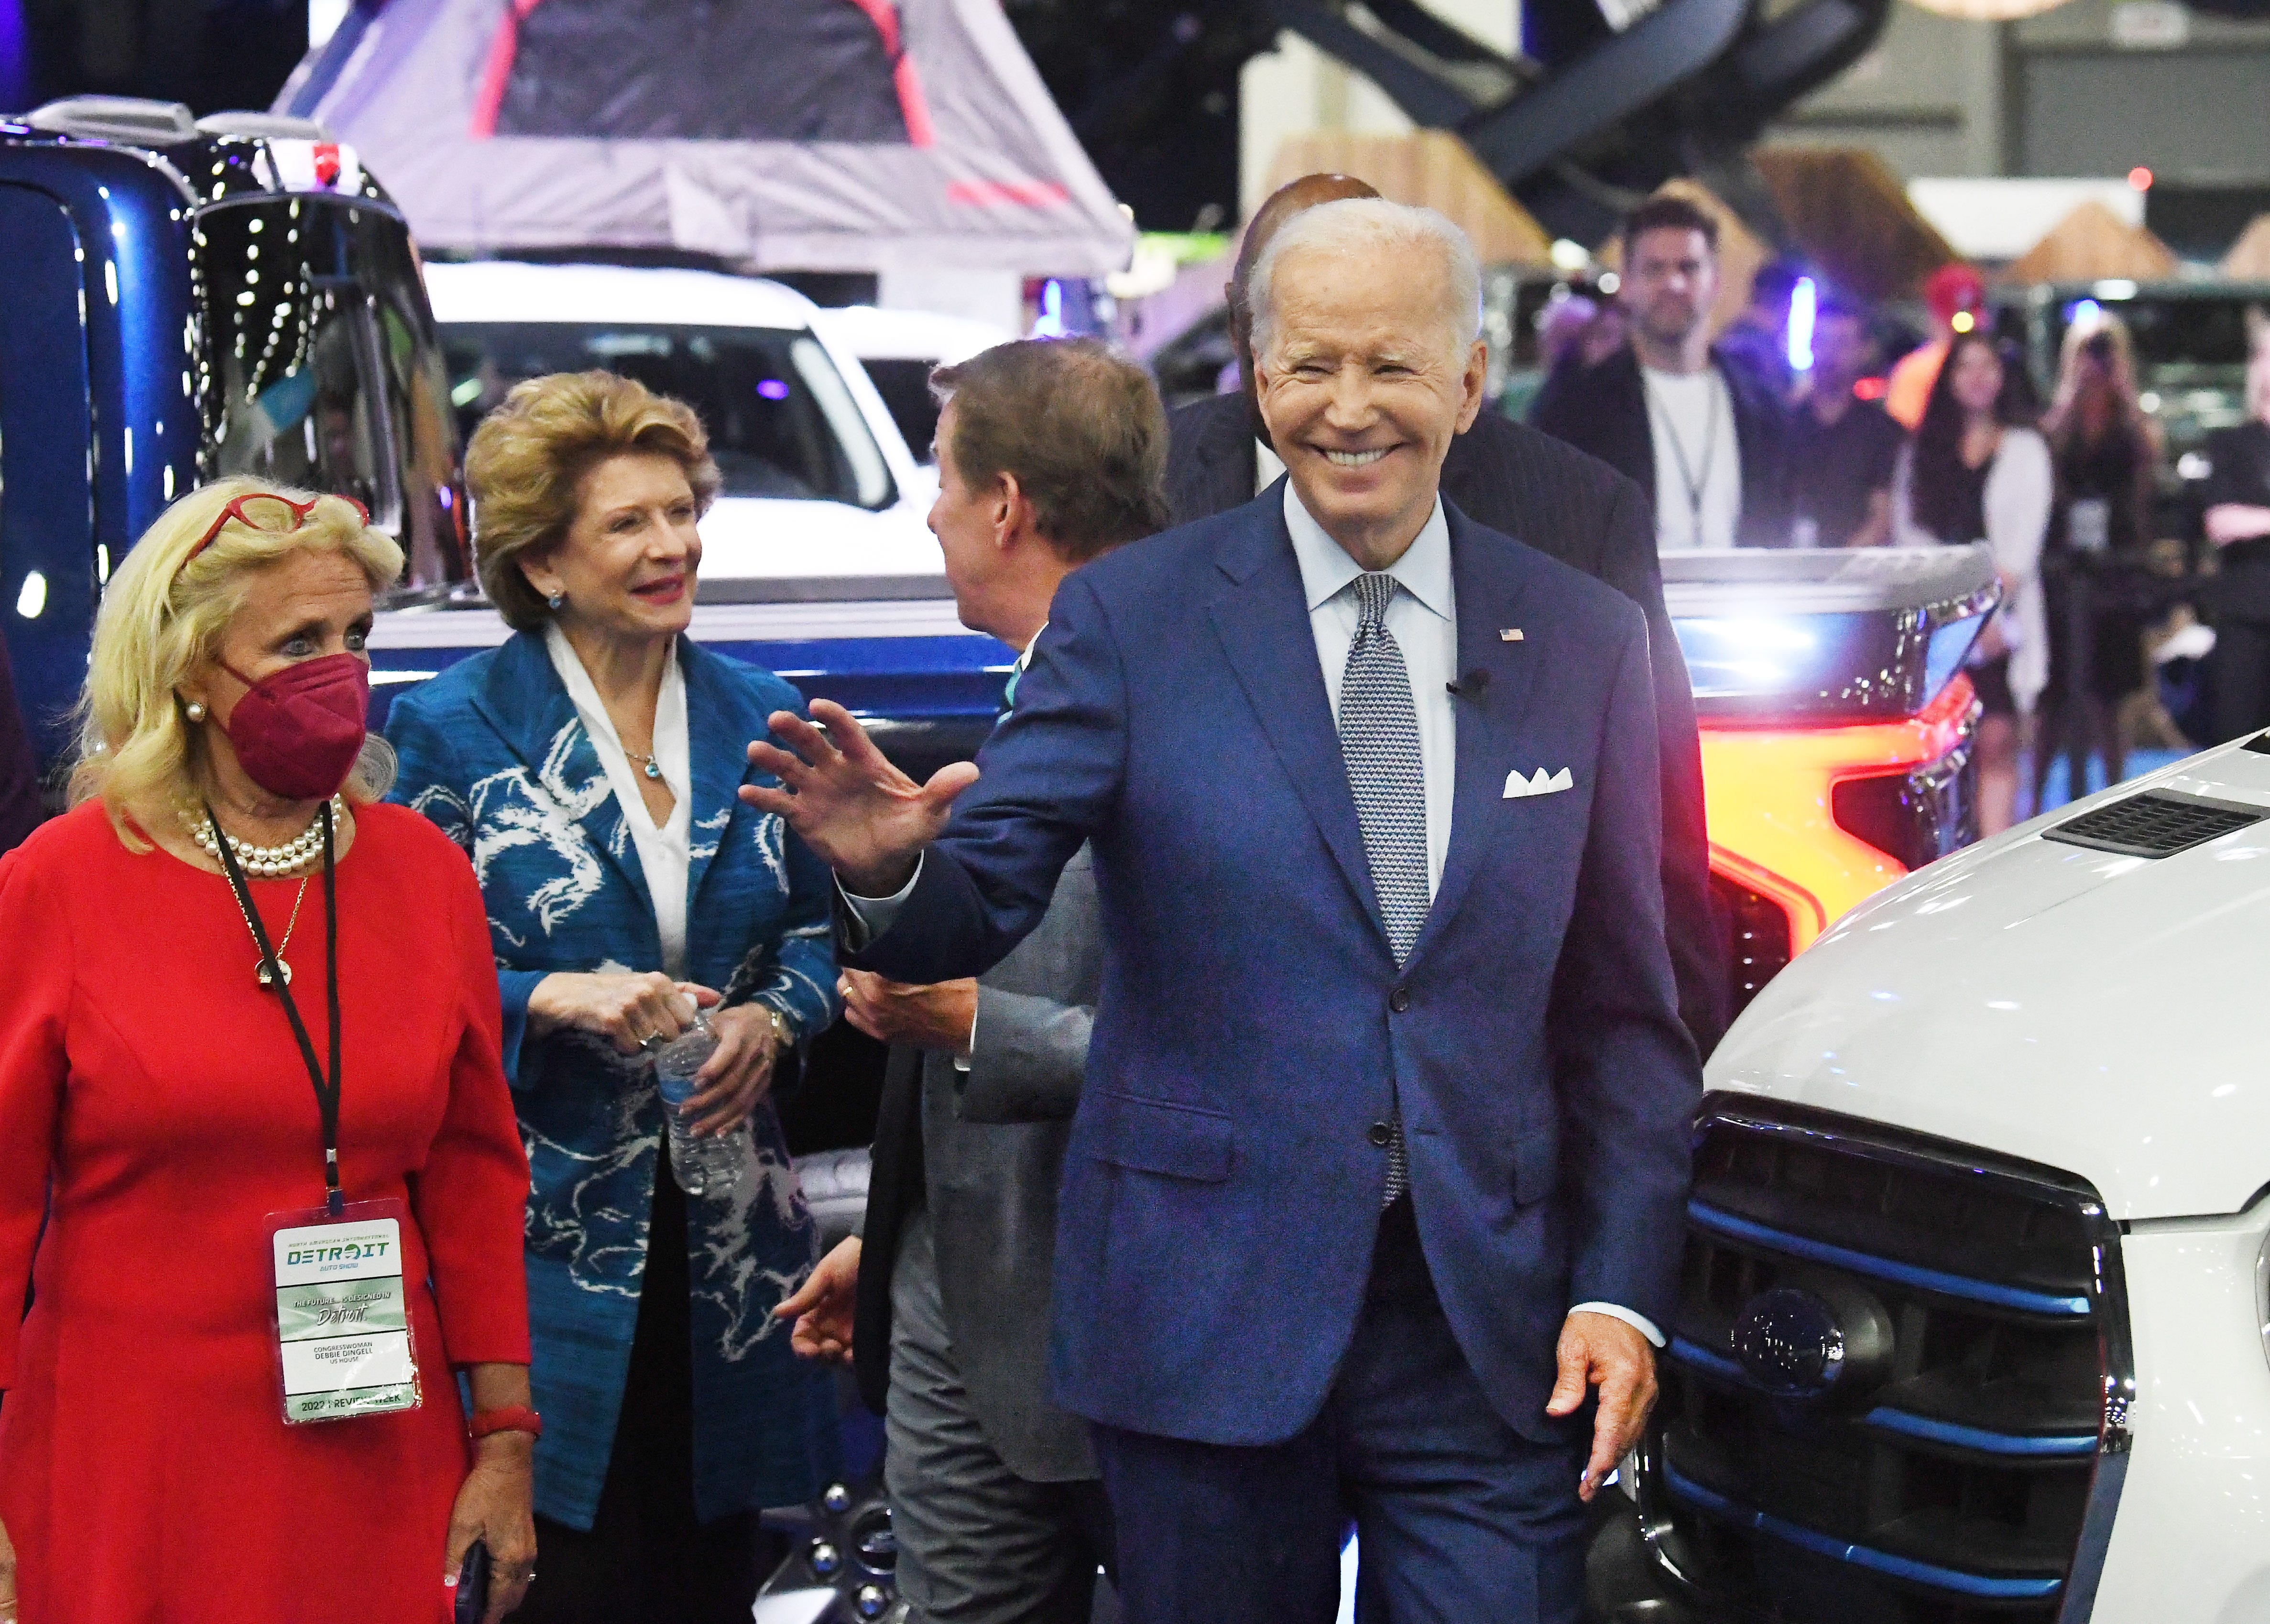 President Joe Biden waves to visitors during a tour of the 2022 North American International Auto Show on Media Day in Detroit, Michigan on September 14, 2022.